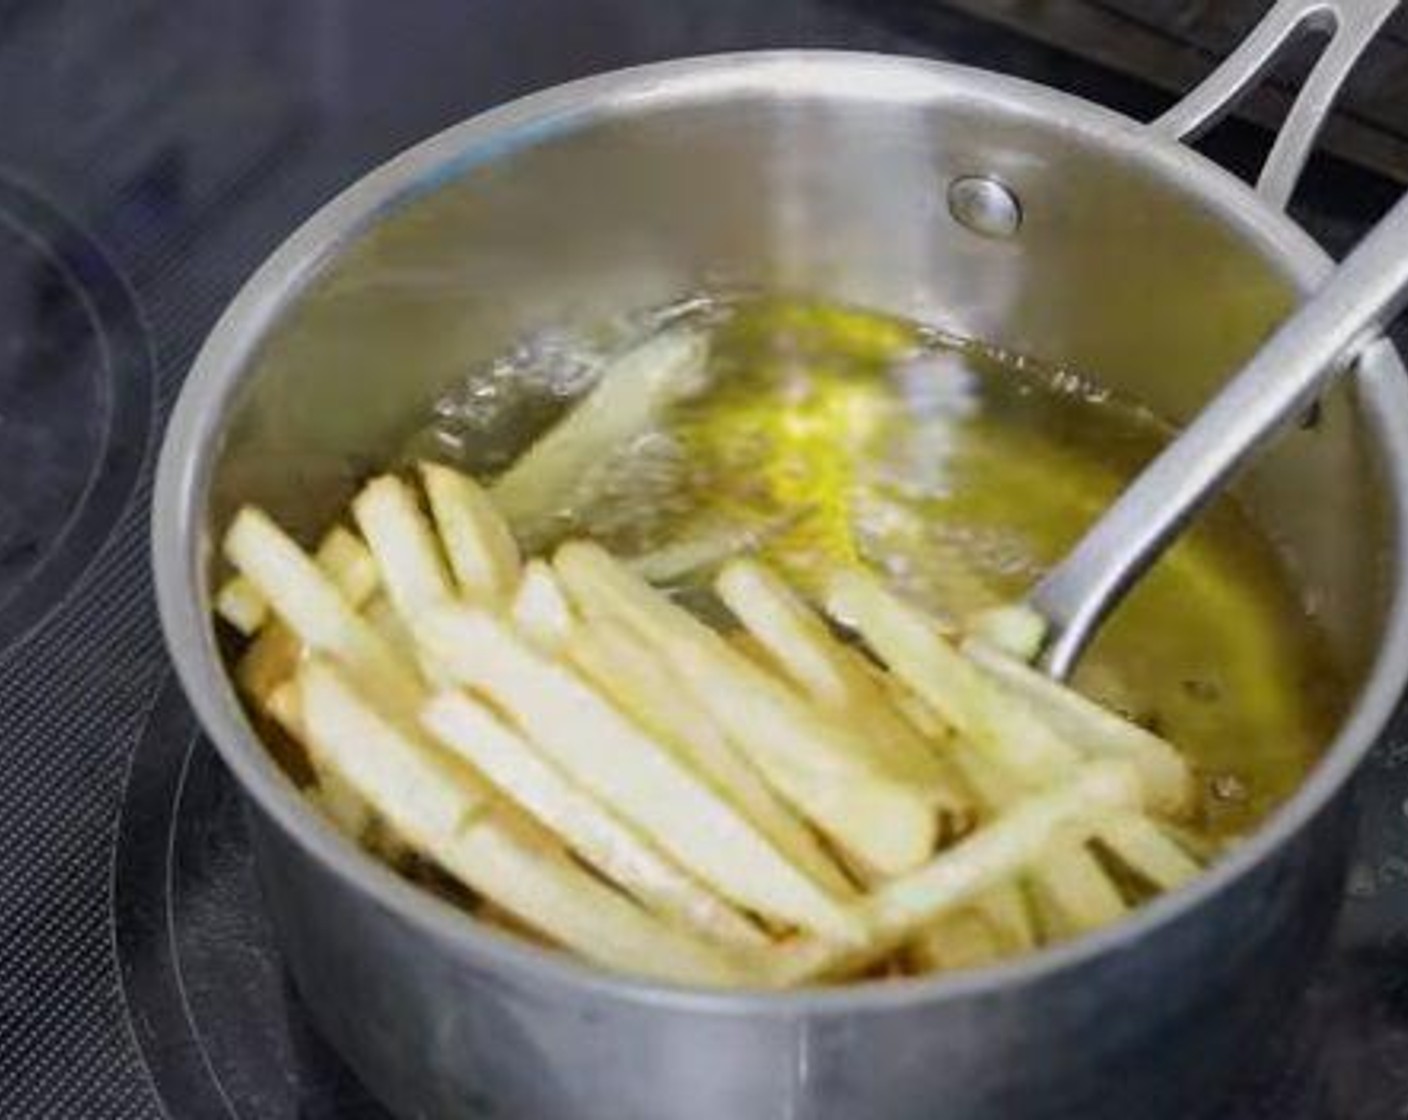 step 4 When oil reaches 320 degrees F (160 degrees C), place the potatoes in the oil. Working in small batches, fry for 2 to 3 minutes until they are floppy. Remove from oil, drain, and cool to room temperature.